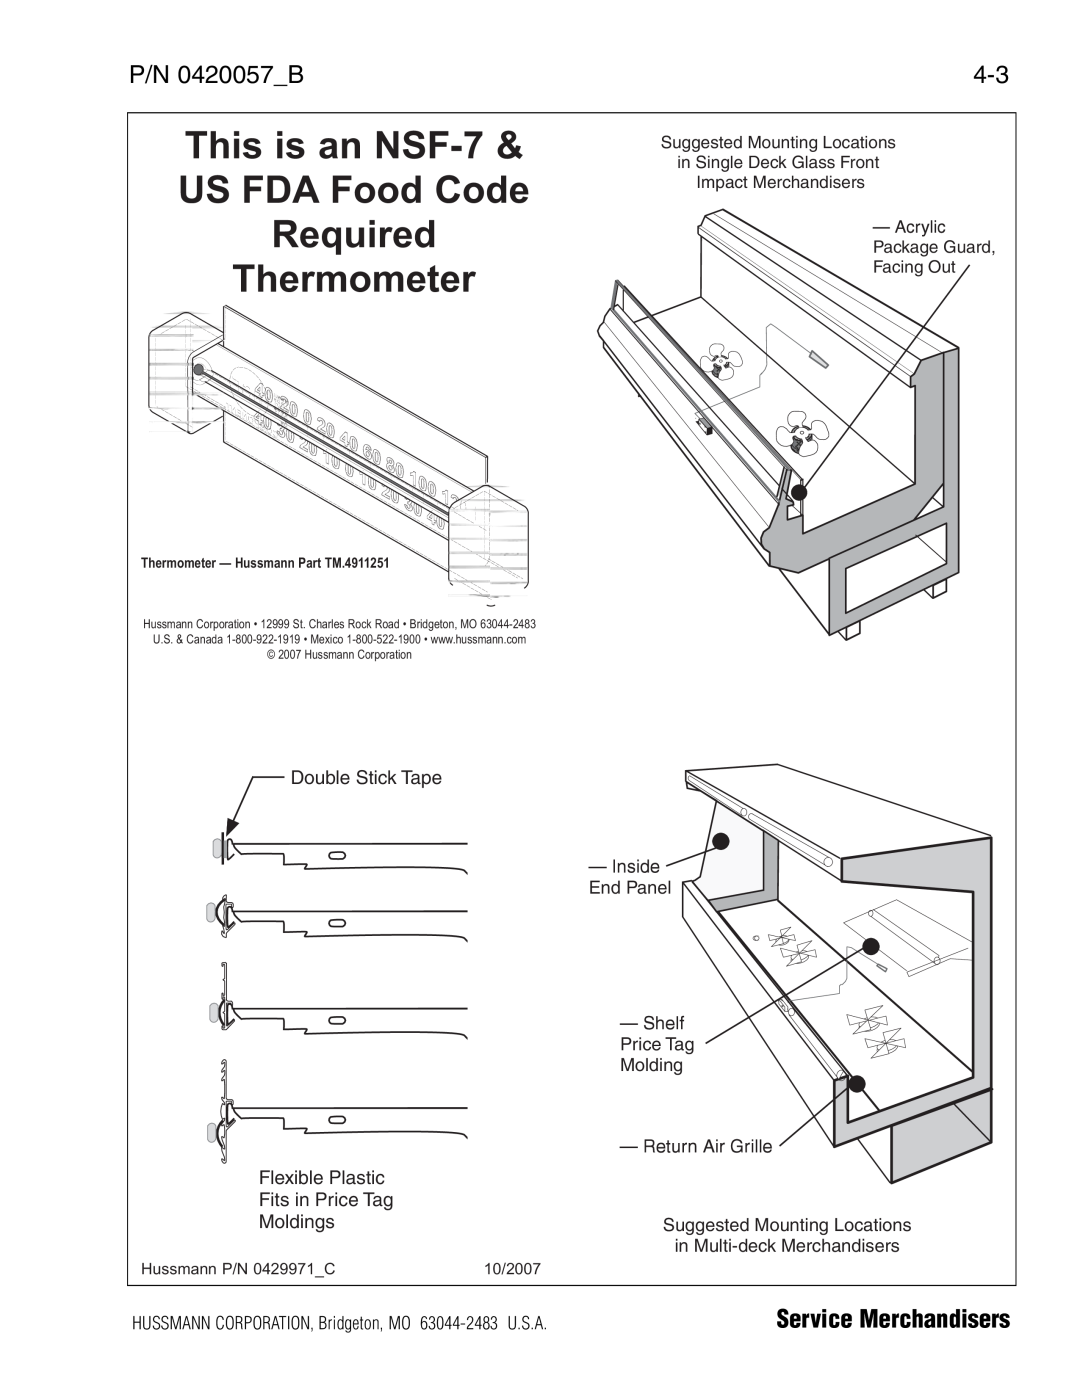 hussman P/N 0420057_B This is an NSF-7, US FDA Food Code, Required, Thermometer, P/N 0420057B, Service Merchandisers 